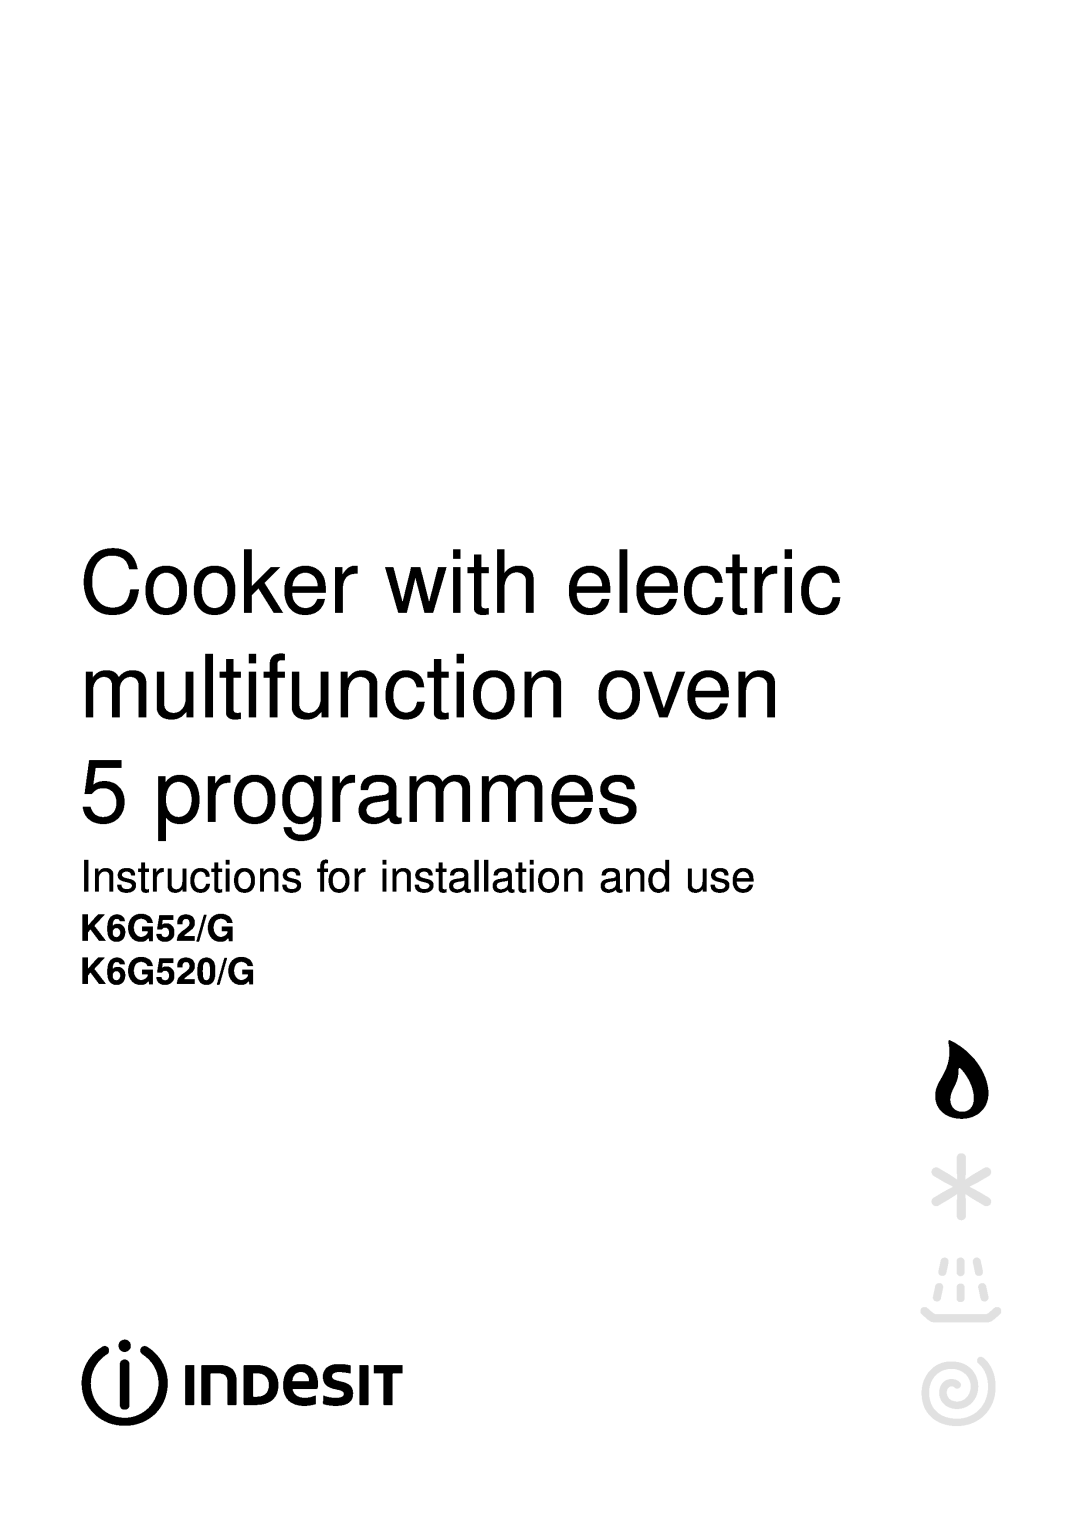 Indesit K6G520/G manual Cooker with electric multifunction oven 5 programmes, Instructions for installation and use 